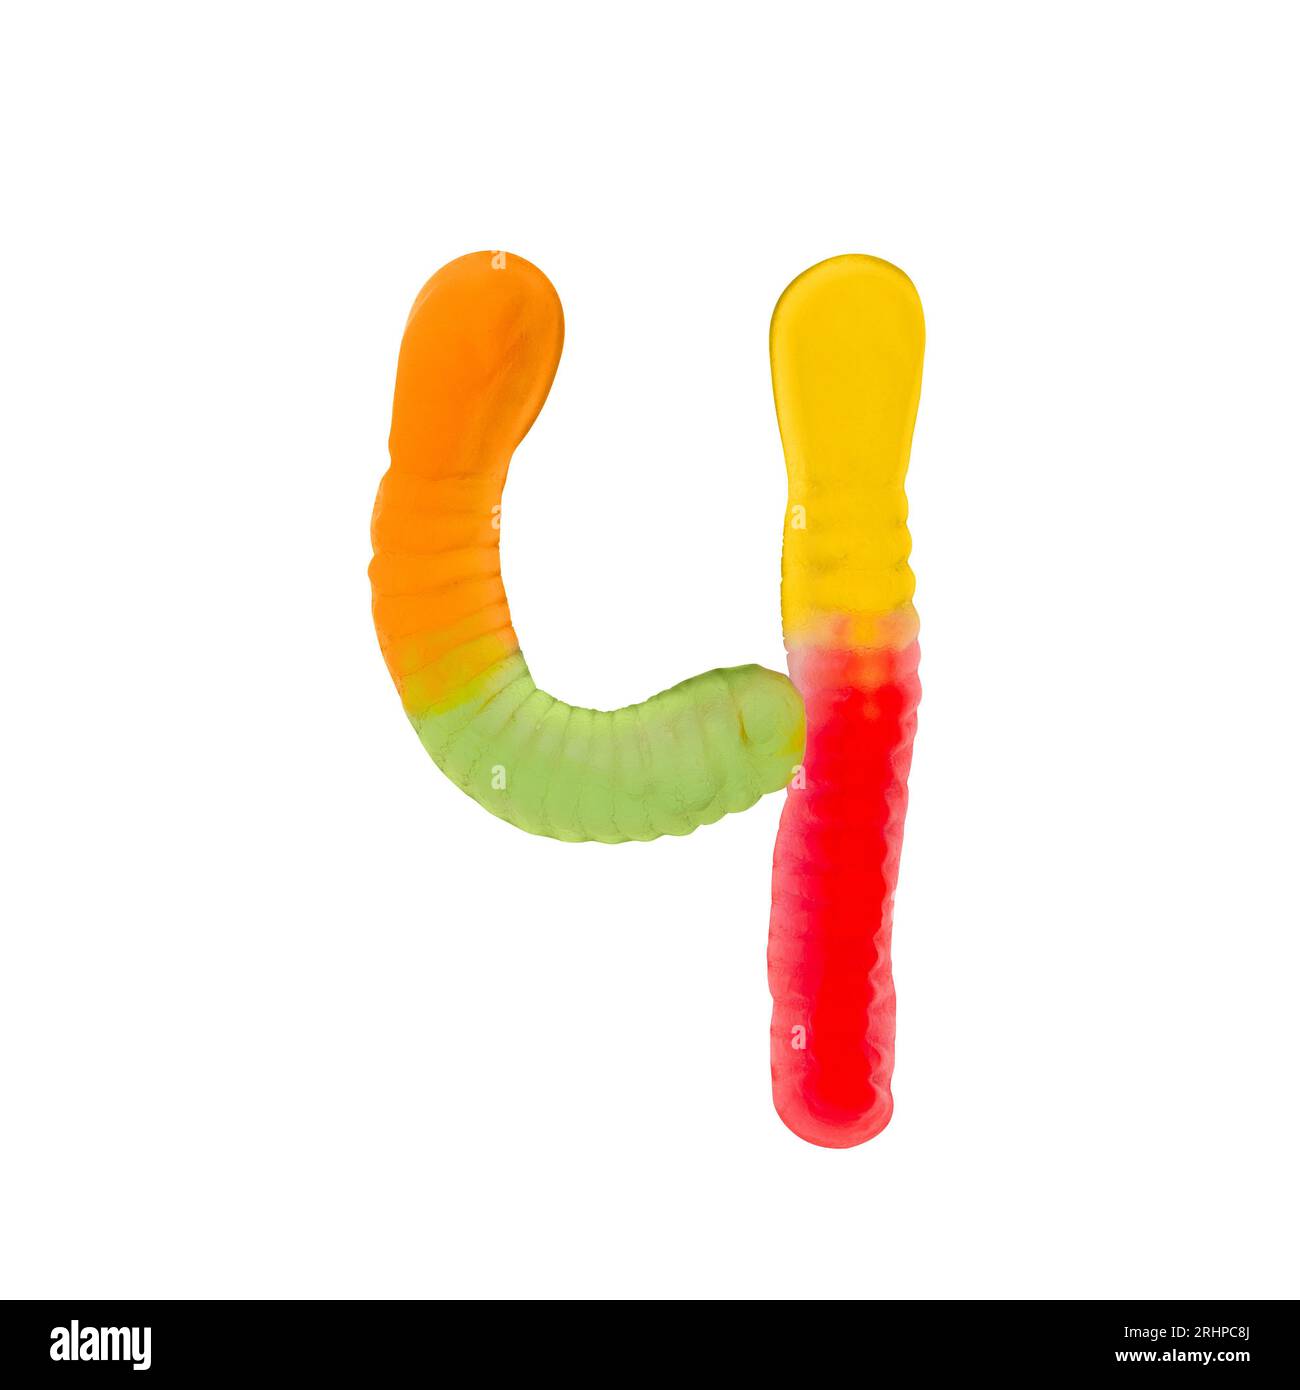 Number 4 made of gummi worms and isolated on pure white background. Food numeral concept. One number of the set of sweet food font easy to stacking Stock Photo